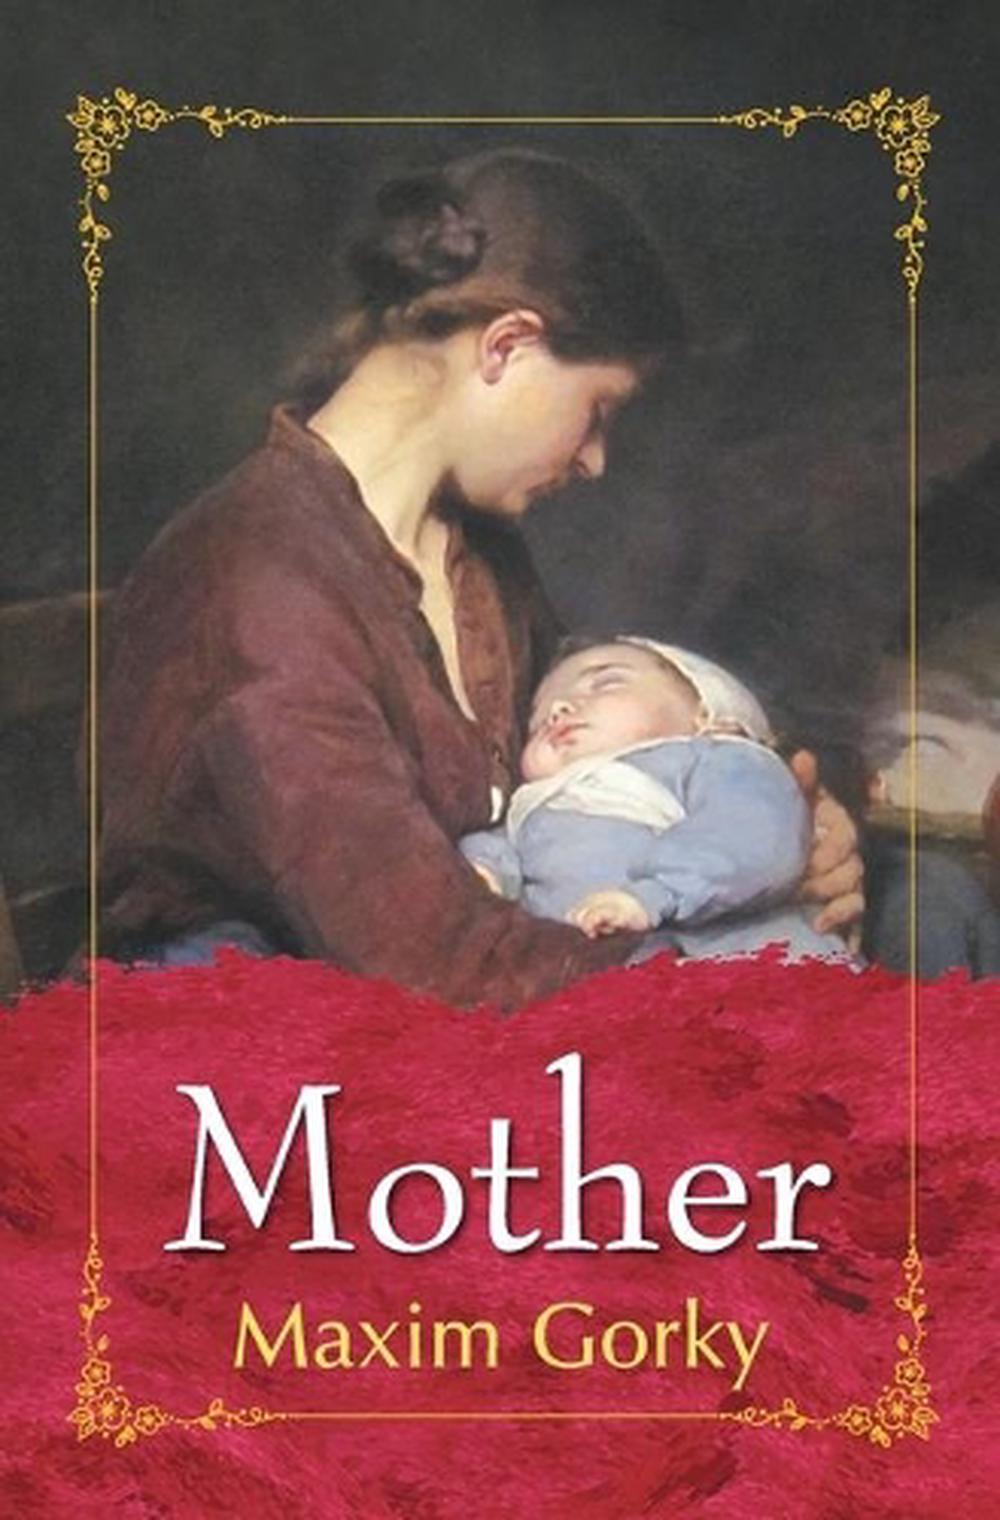 Mother by Maxim Gorky (English) Paperback Book Free Shipping ...